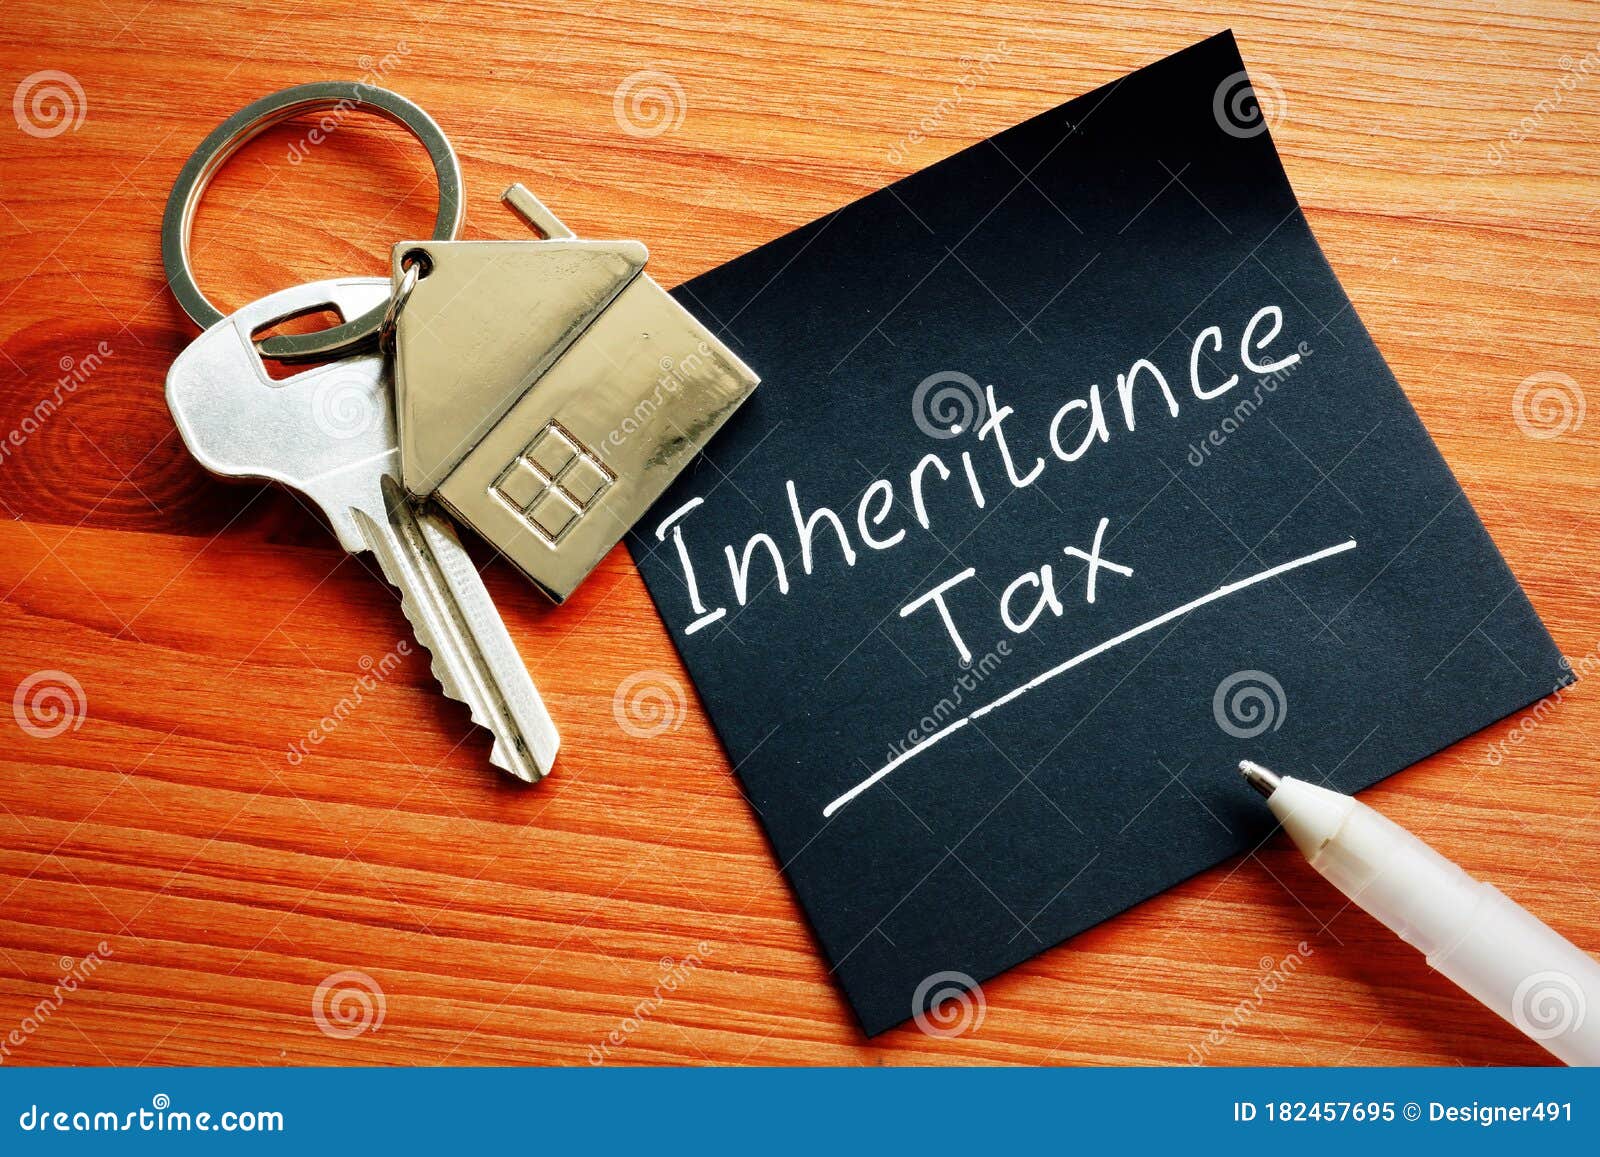 inheritance tax and key from inherited property